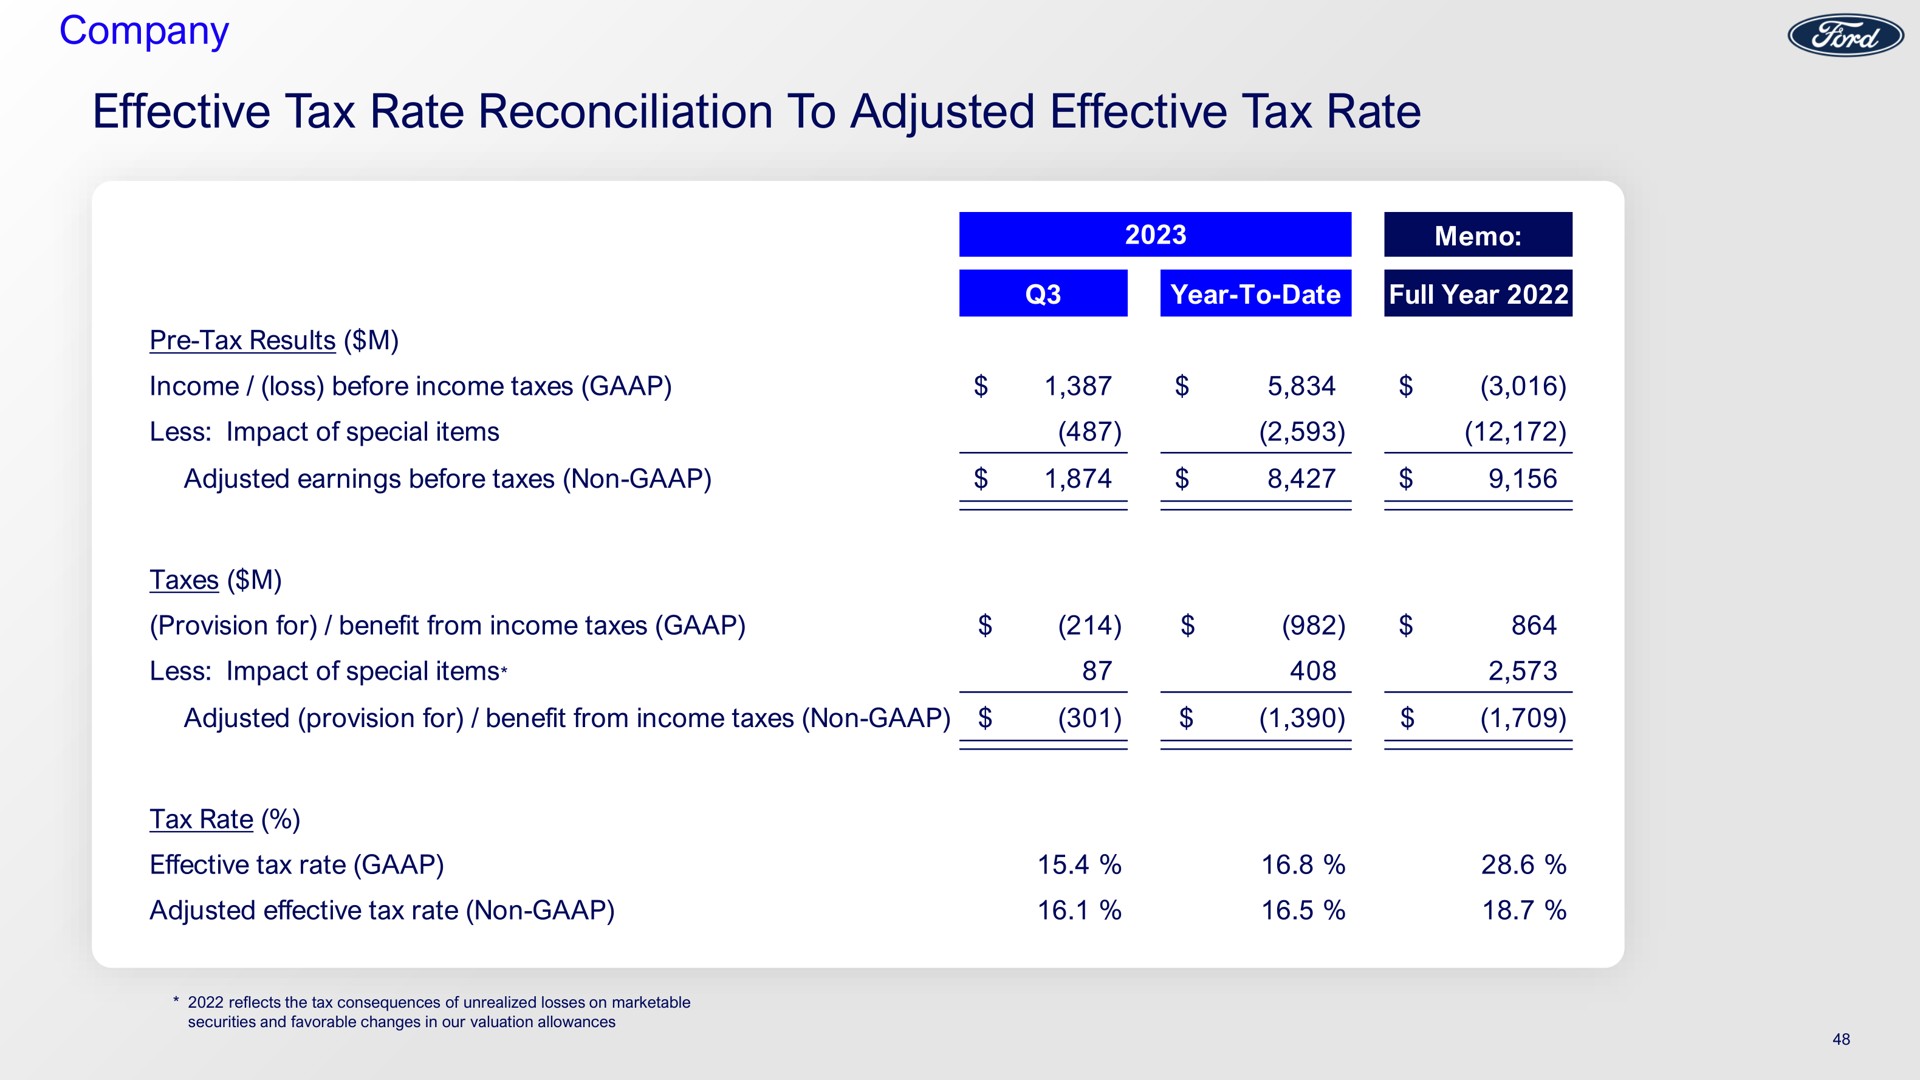 company effective tax rate reconciliation to adjusted effective tax rate | Ford